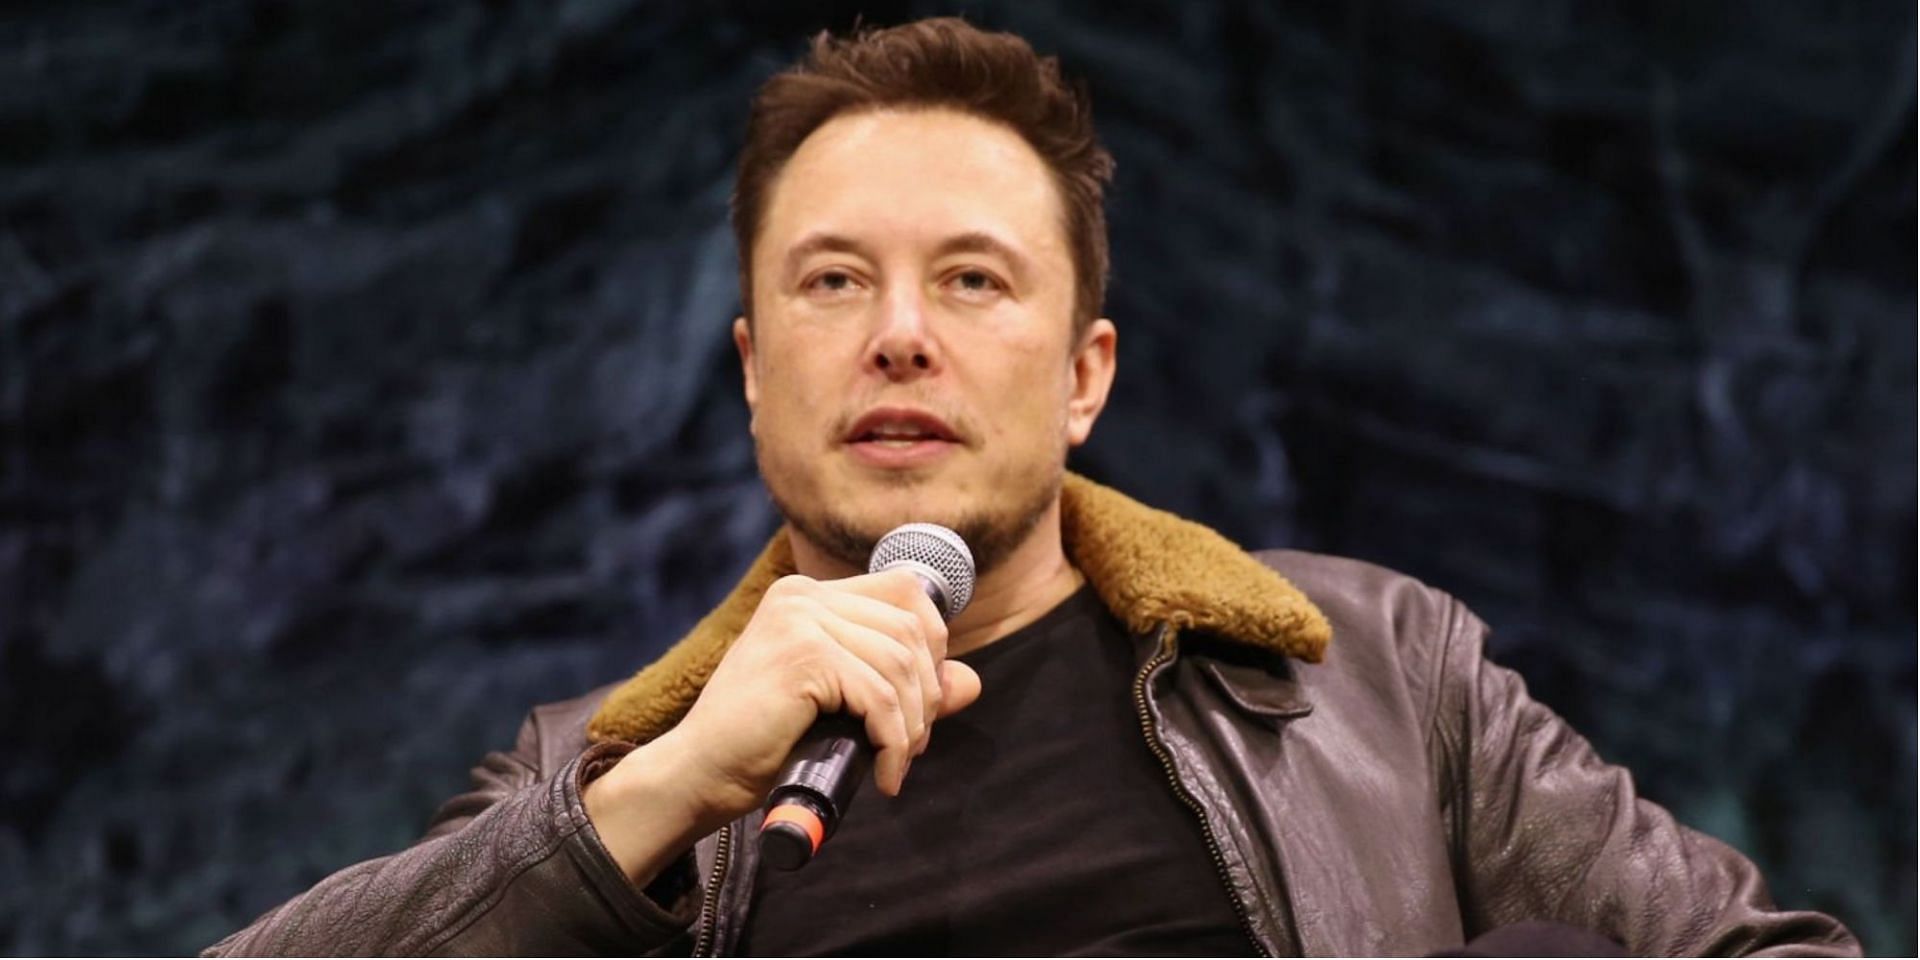 Elon Musk&#039;s past tweets against gender pronouns surfaced online as his transgender daughter filed for an official name change (Image via Getty Images)